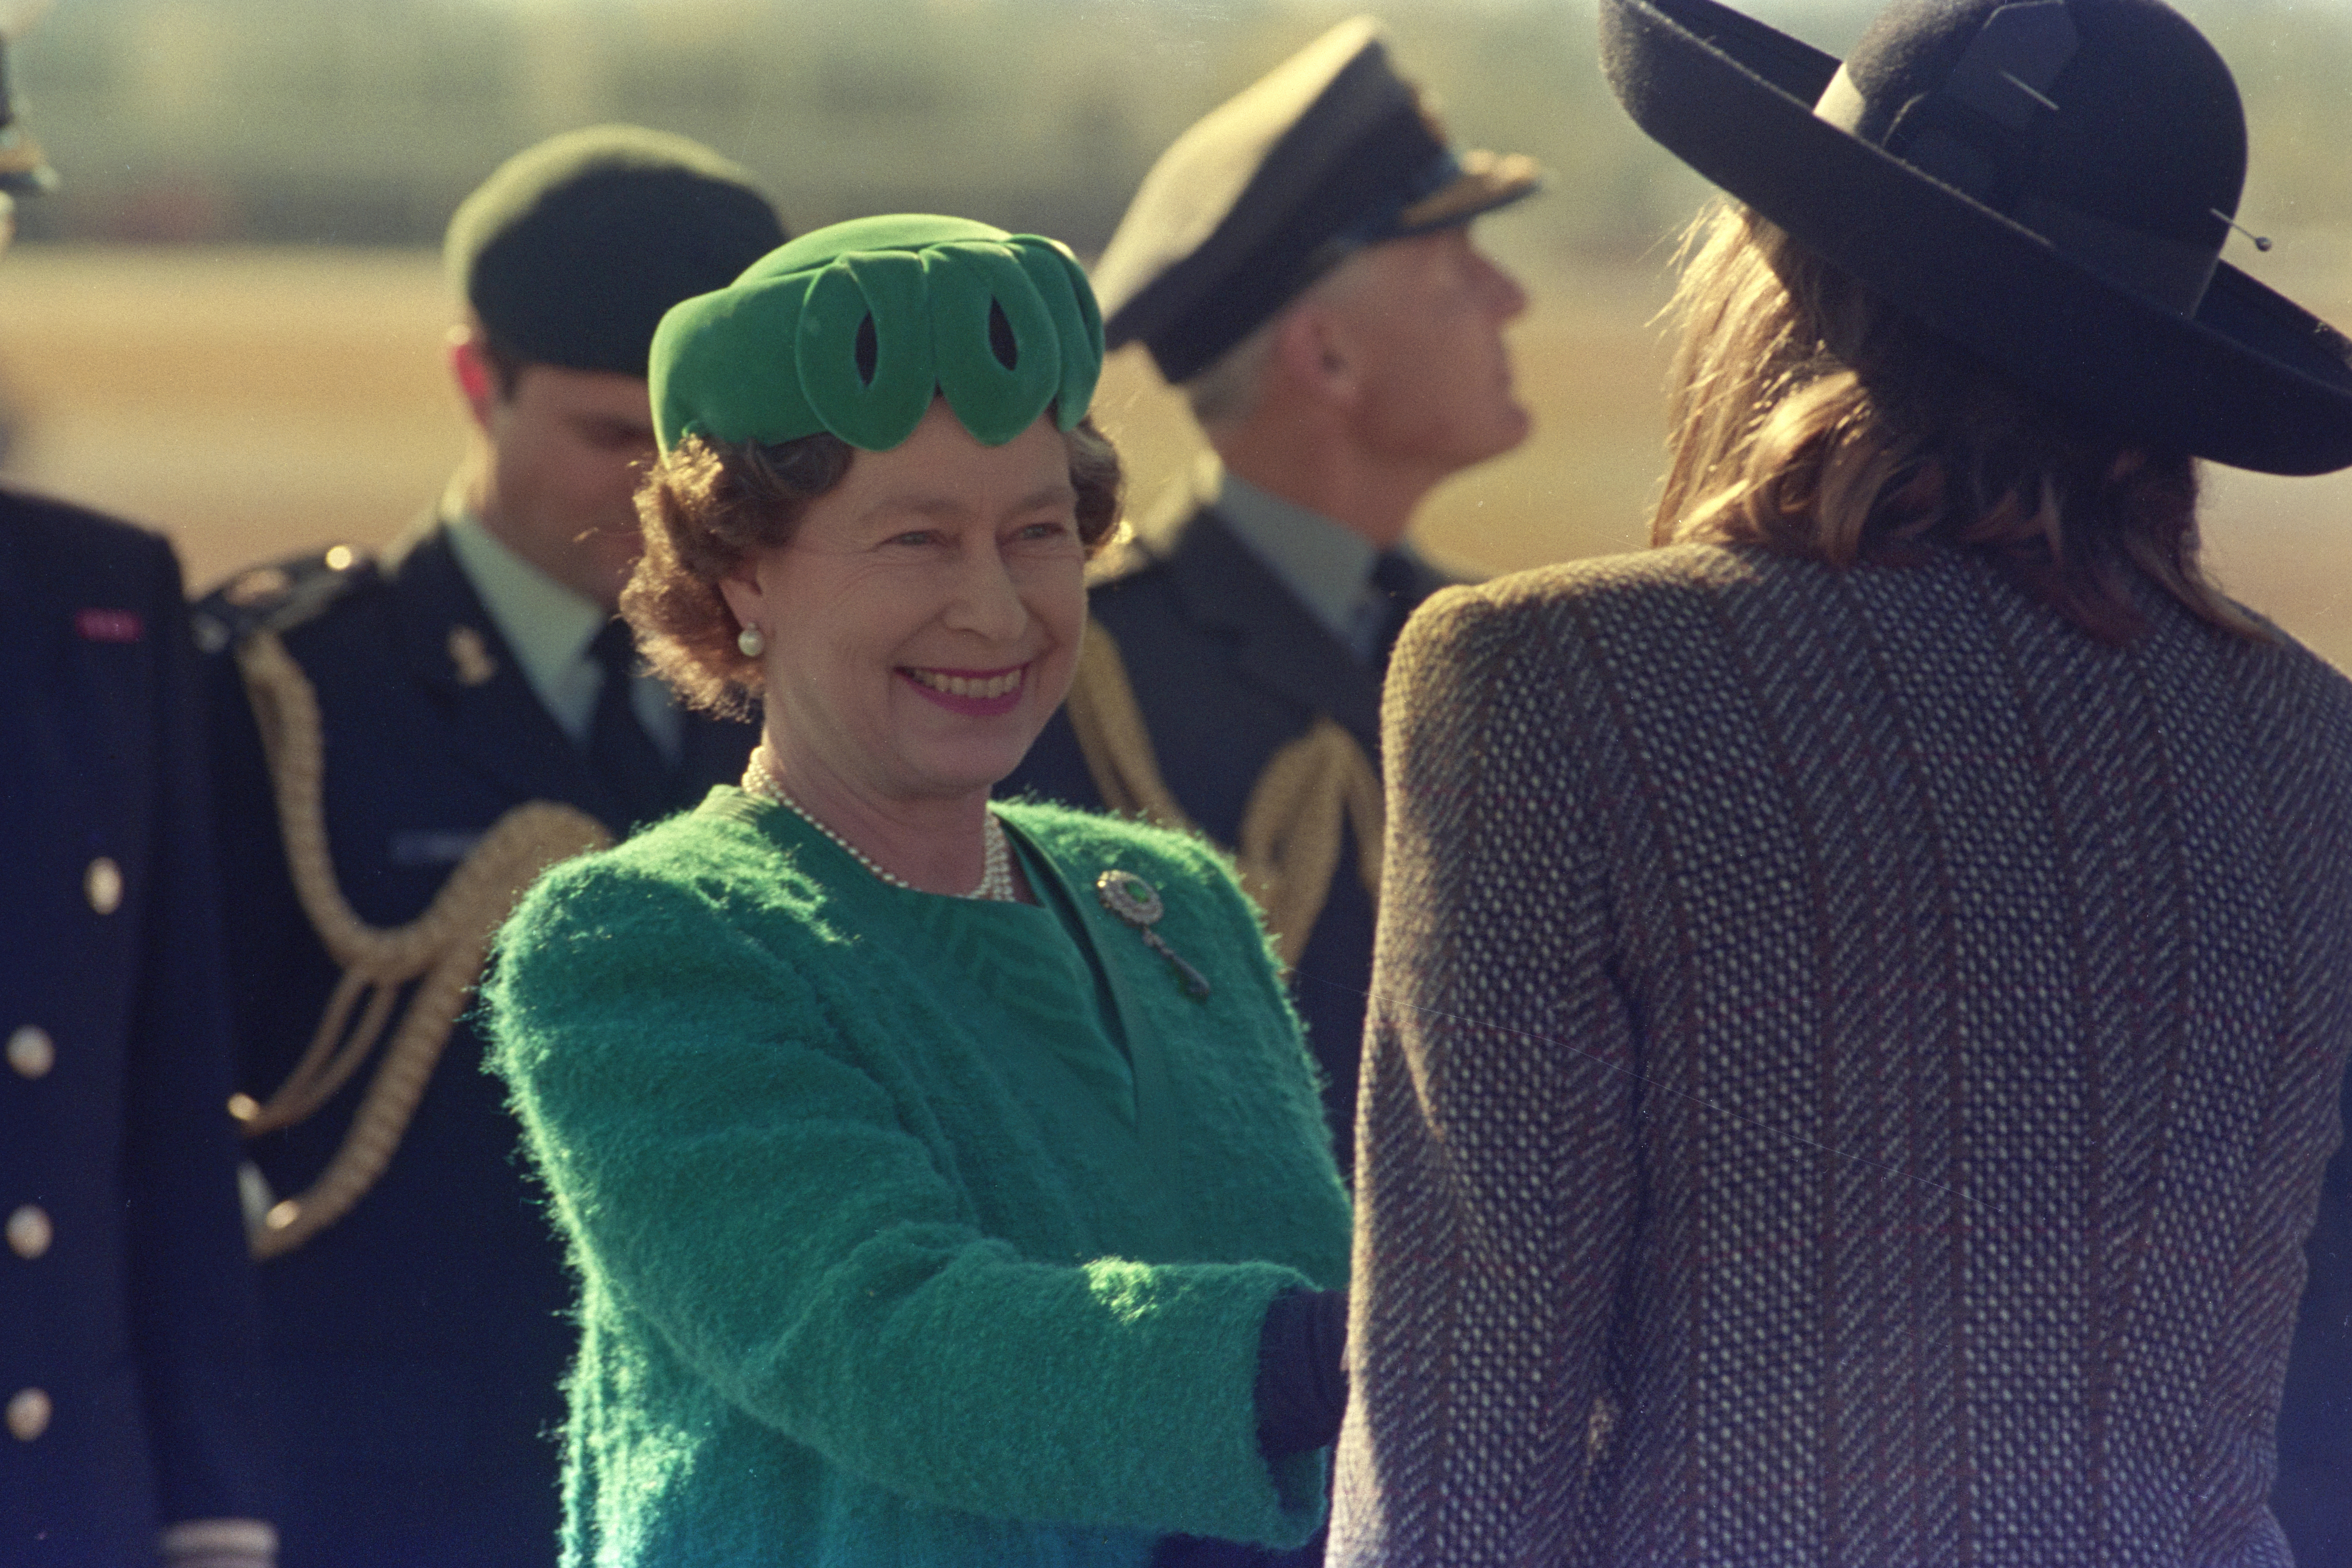 The Okanagan looks back on three visits by the late Queen Elizabeth II